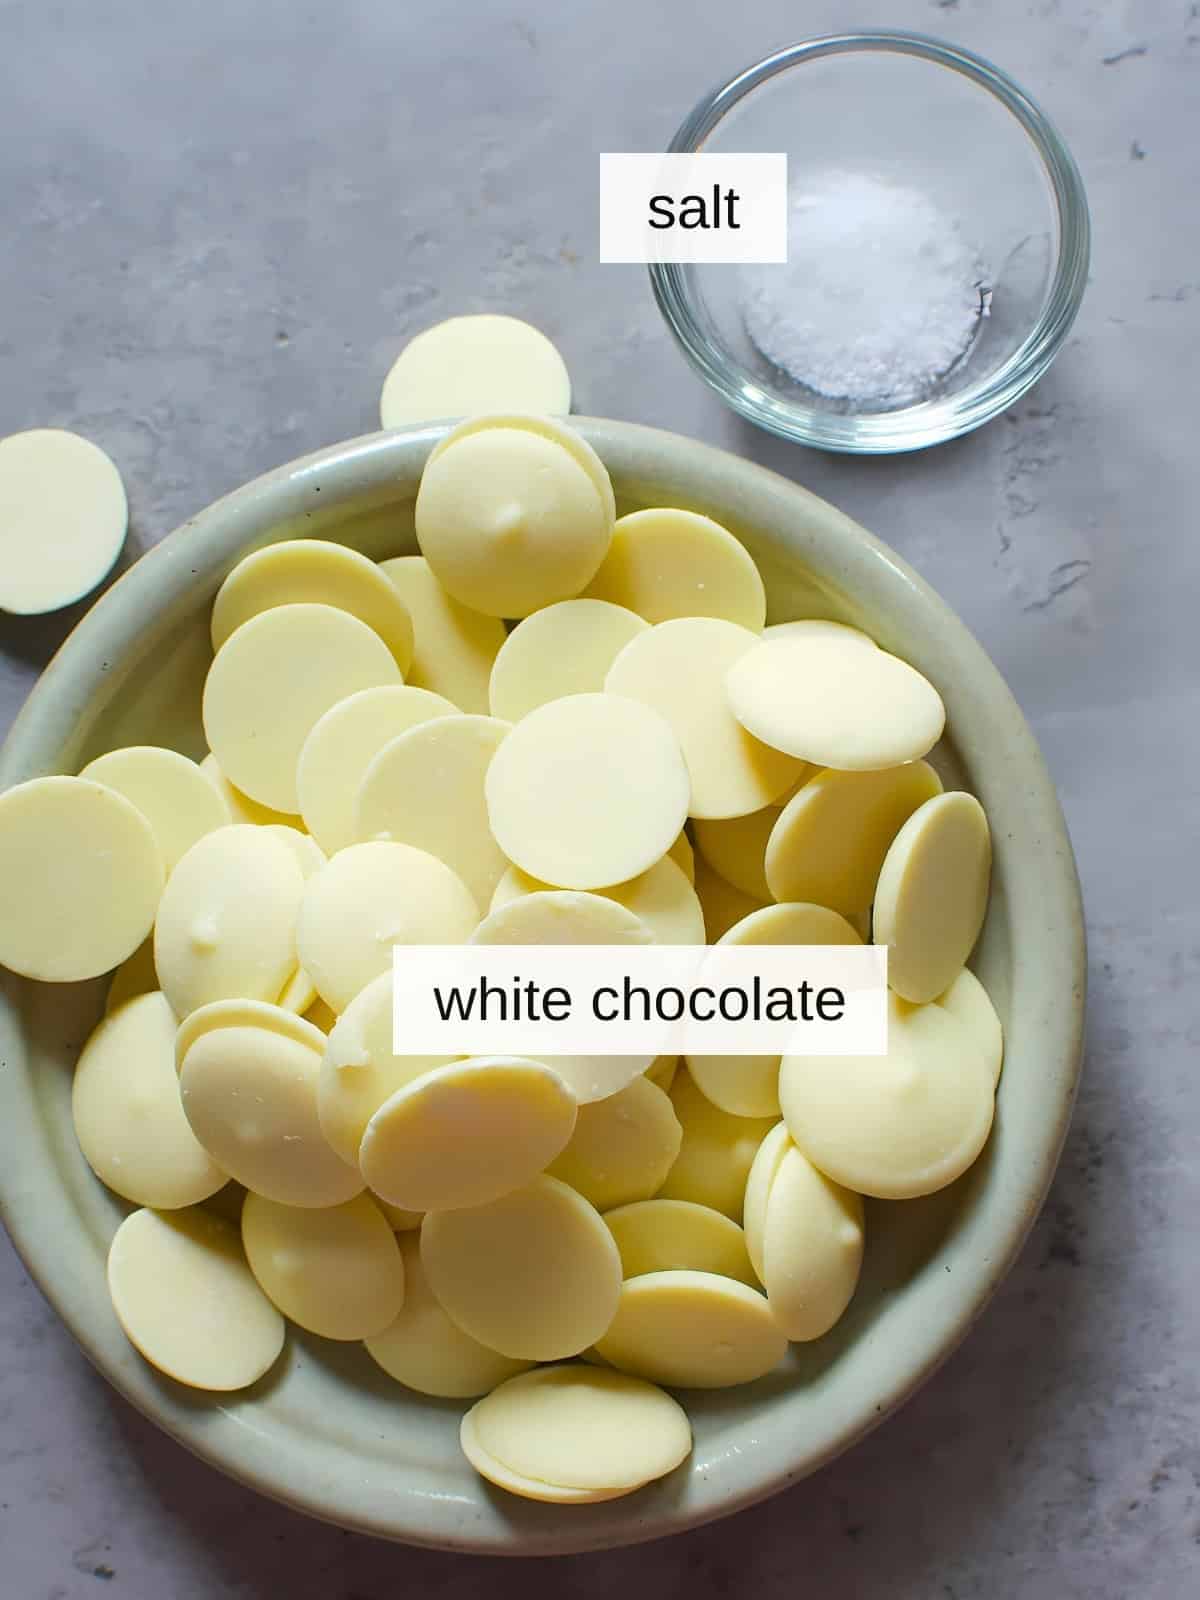 Blonde chocolate recipe ingredients including salt and white chocolate.